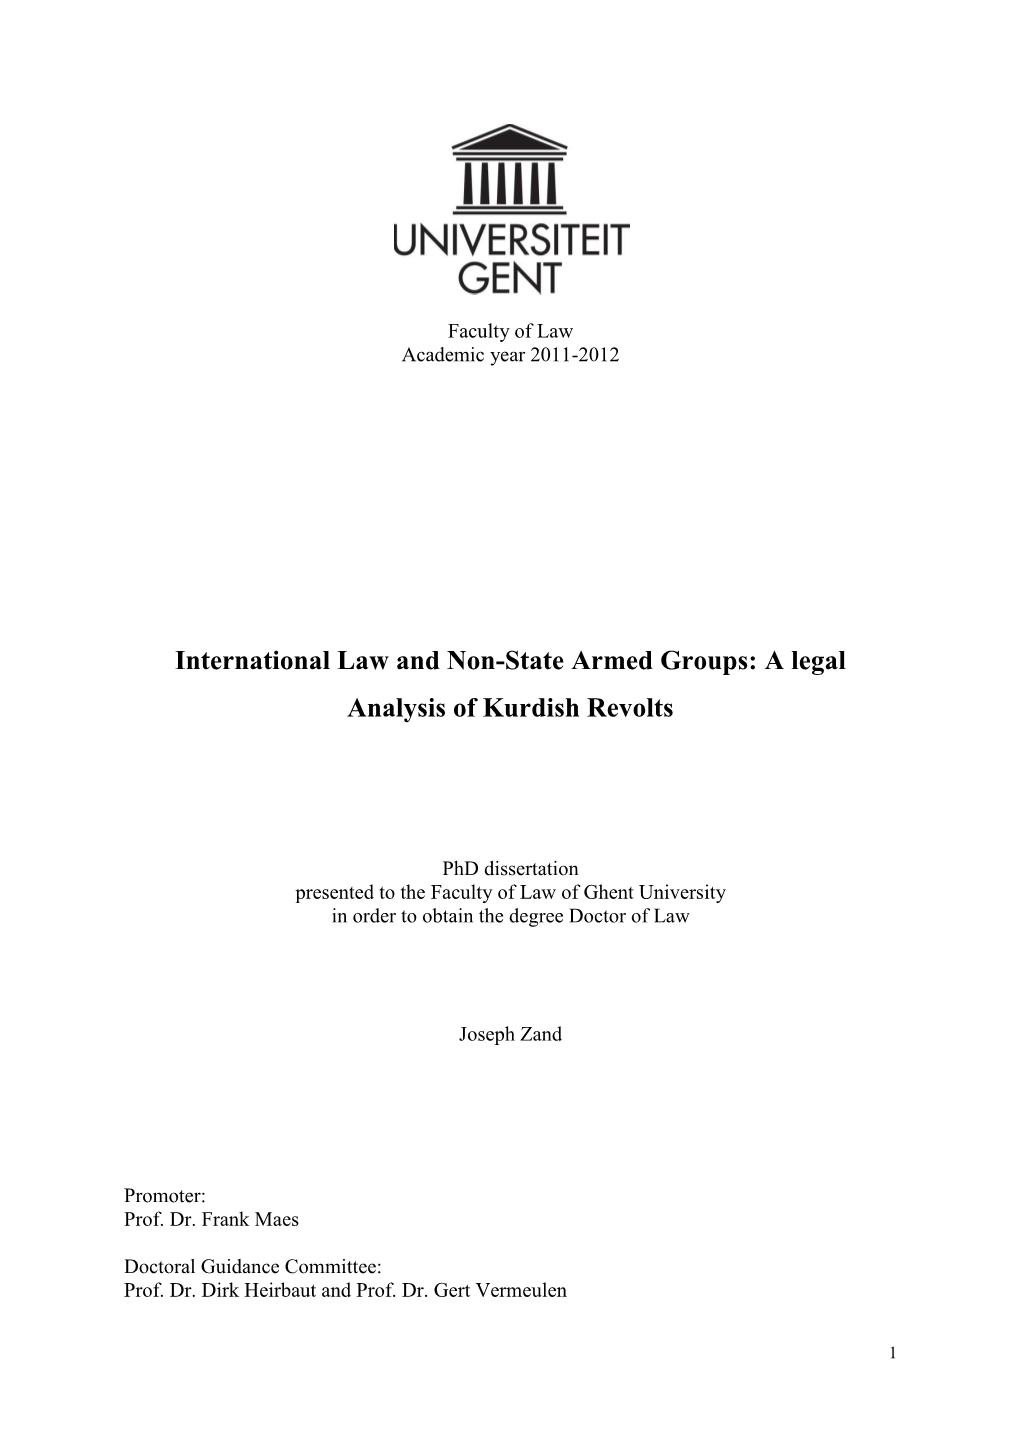 International Law and Non-State Armed Groups: a Legal Analysis of Kurdish Revolts